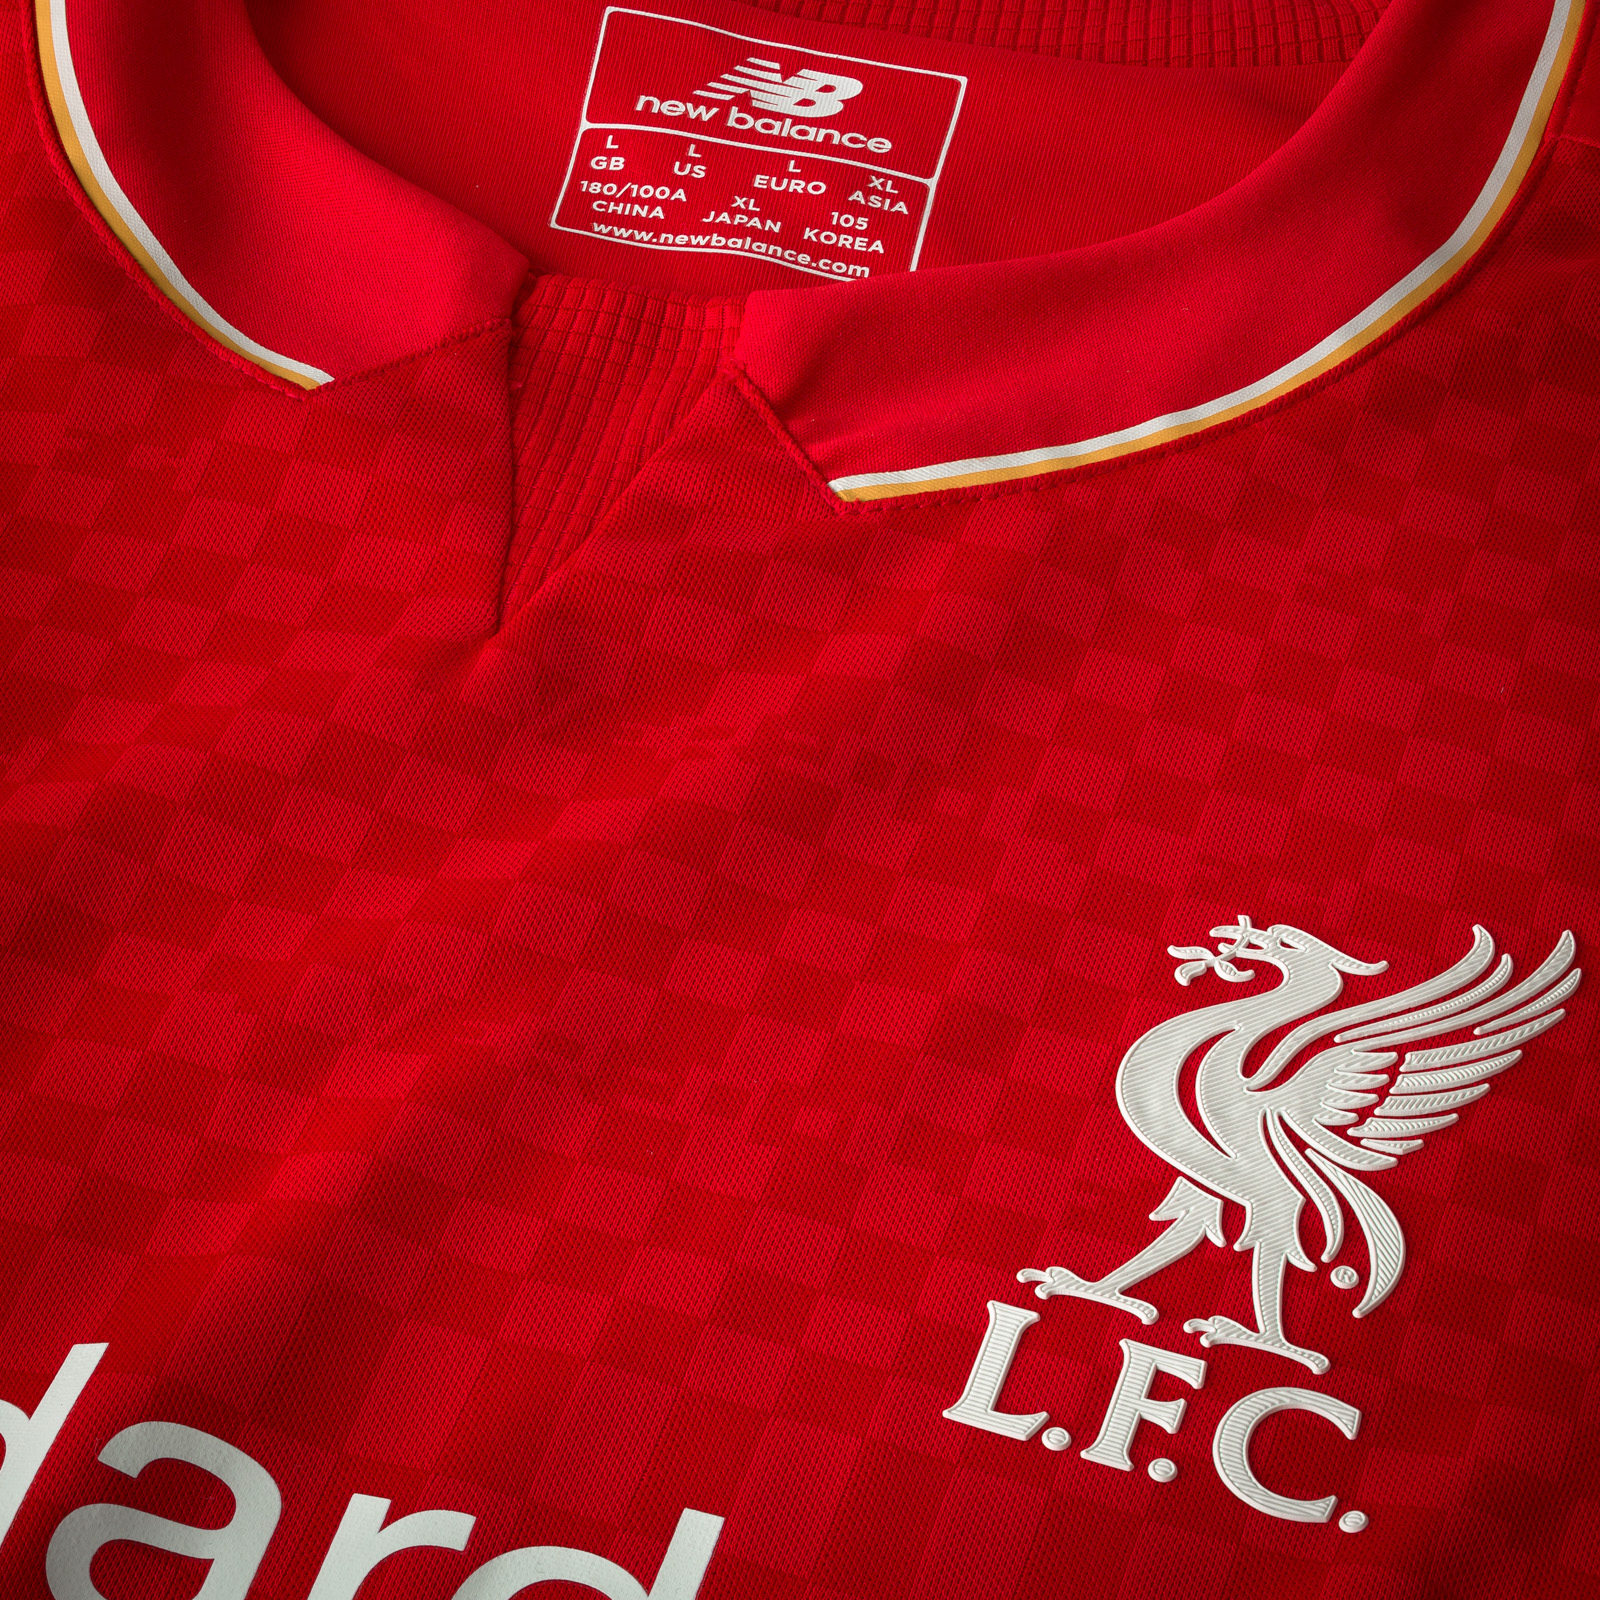 liverpool jersey sports direct